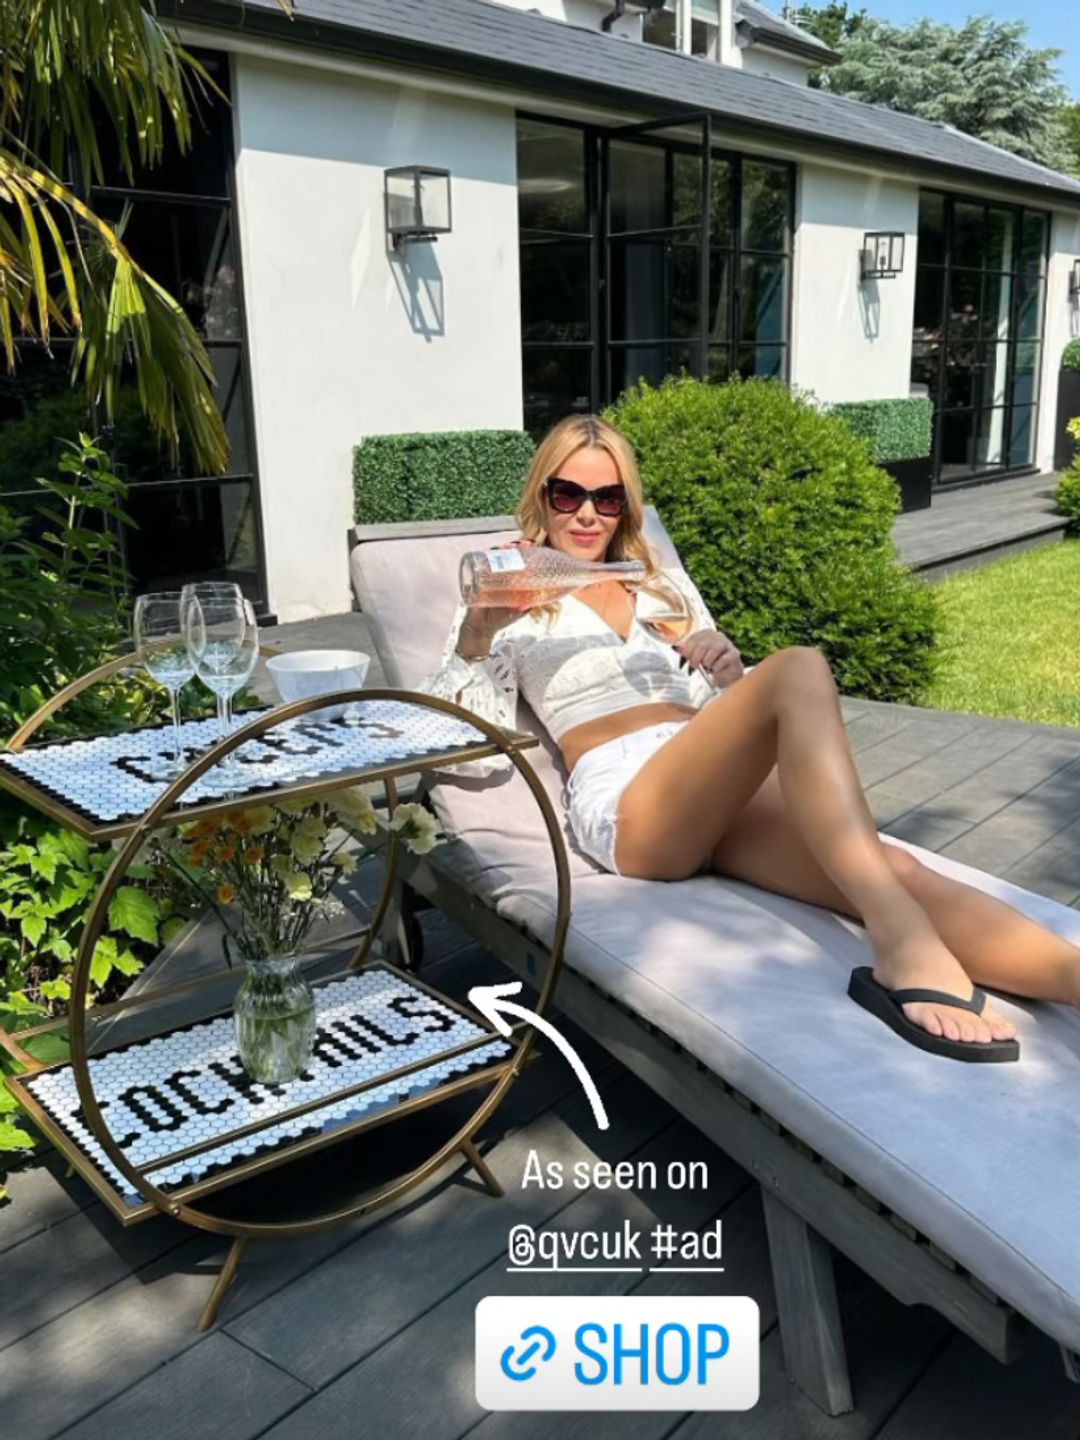 Amanda Holden wearing white shorts and a crop top as she sunbathes in her garden